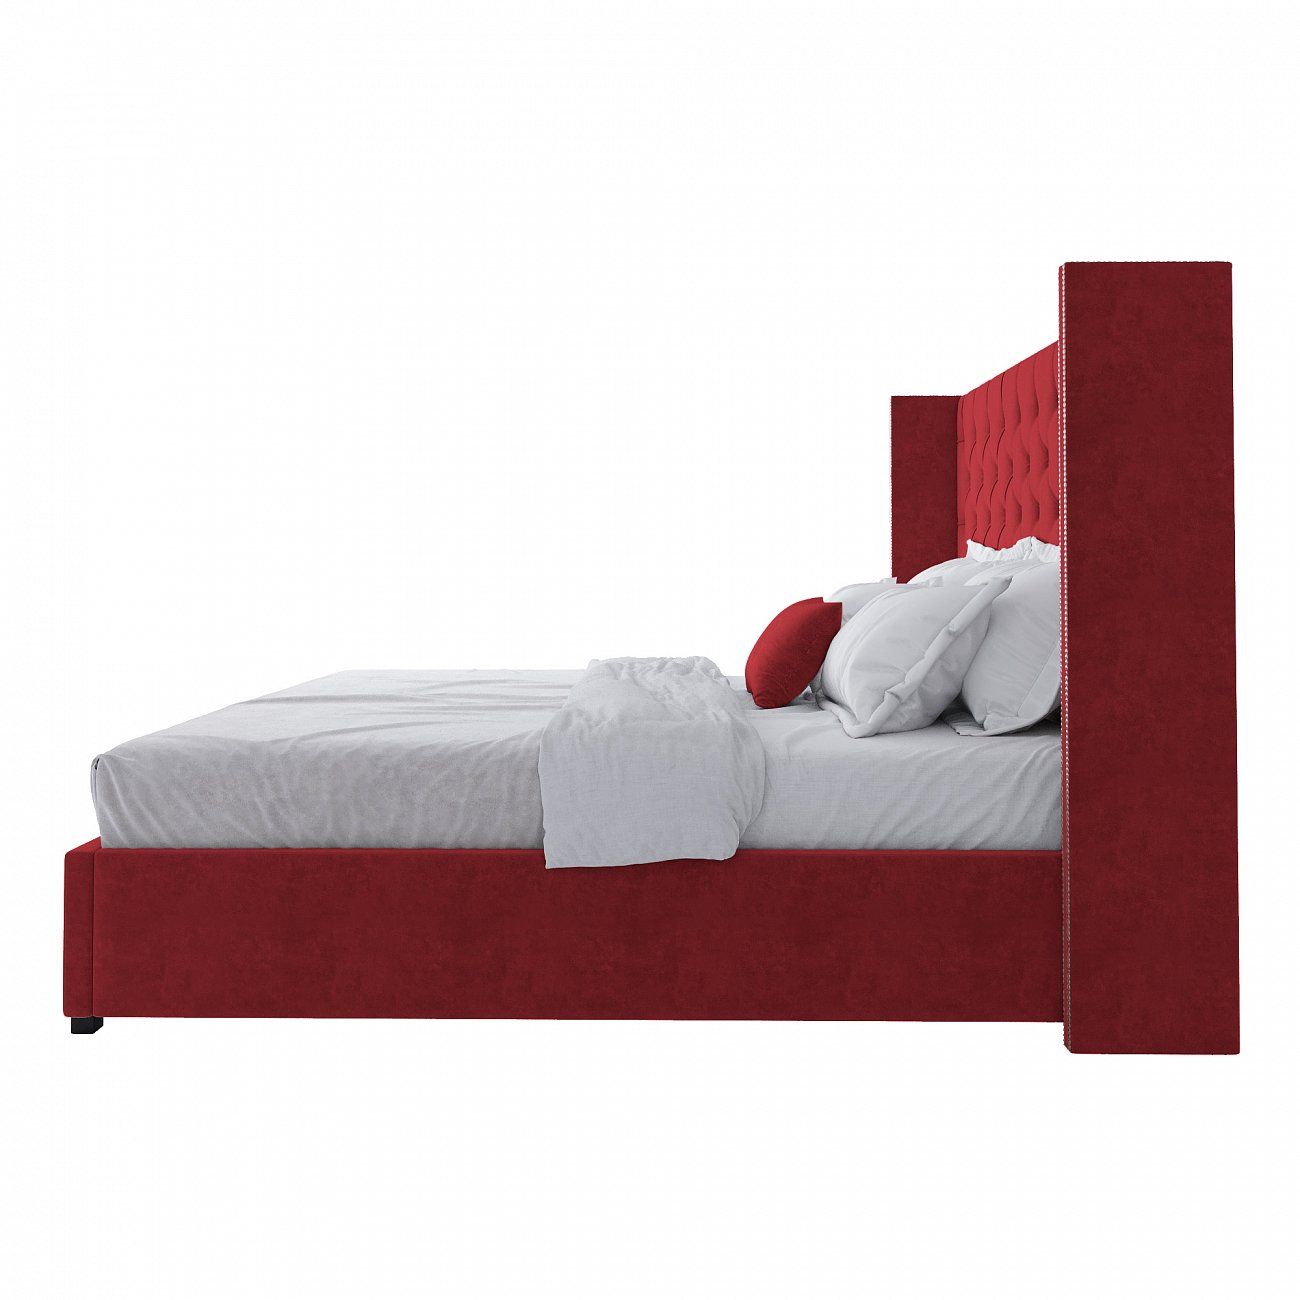 Double bed with upholstered headboard 200x200 cm red Wing